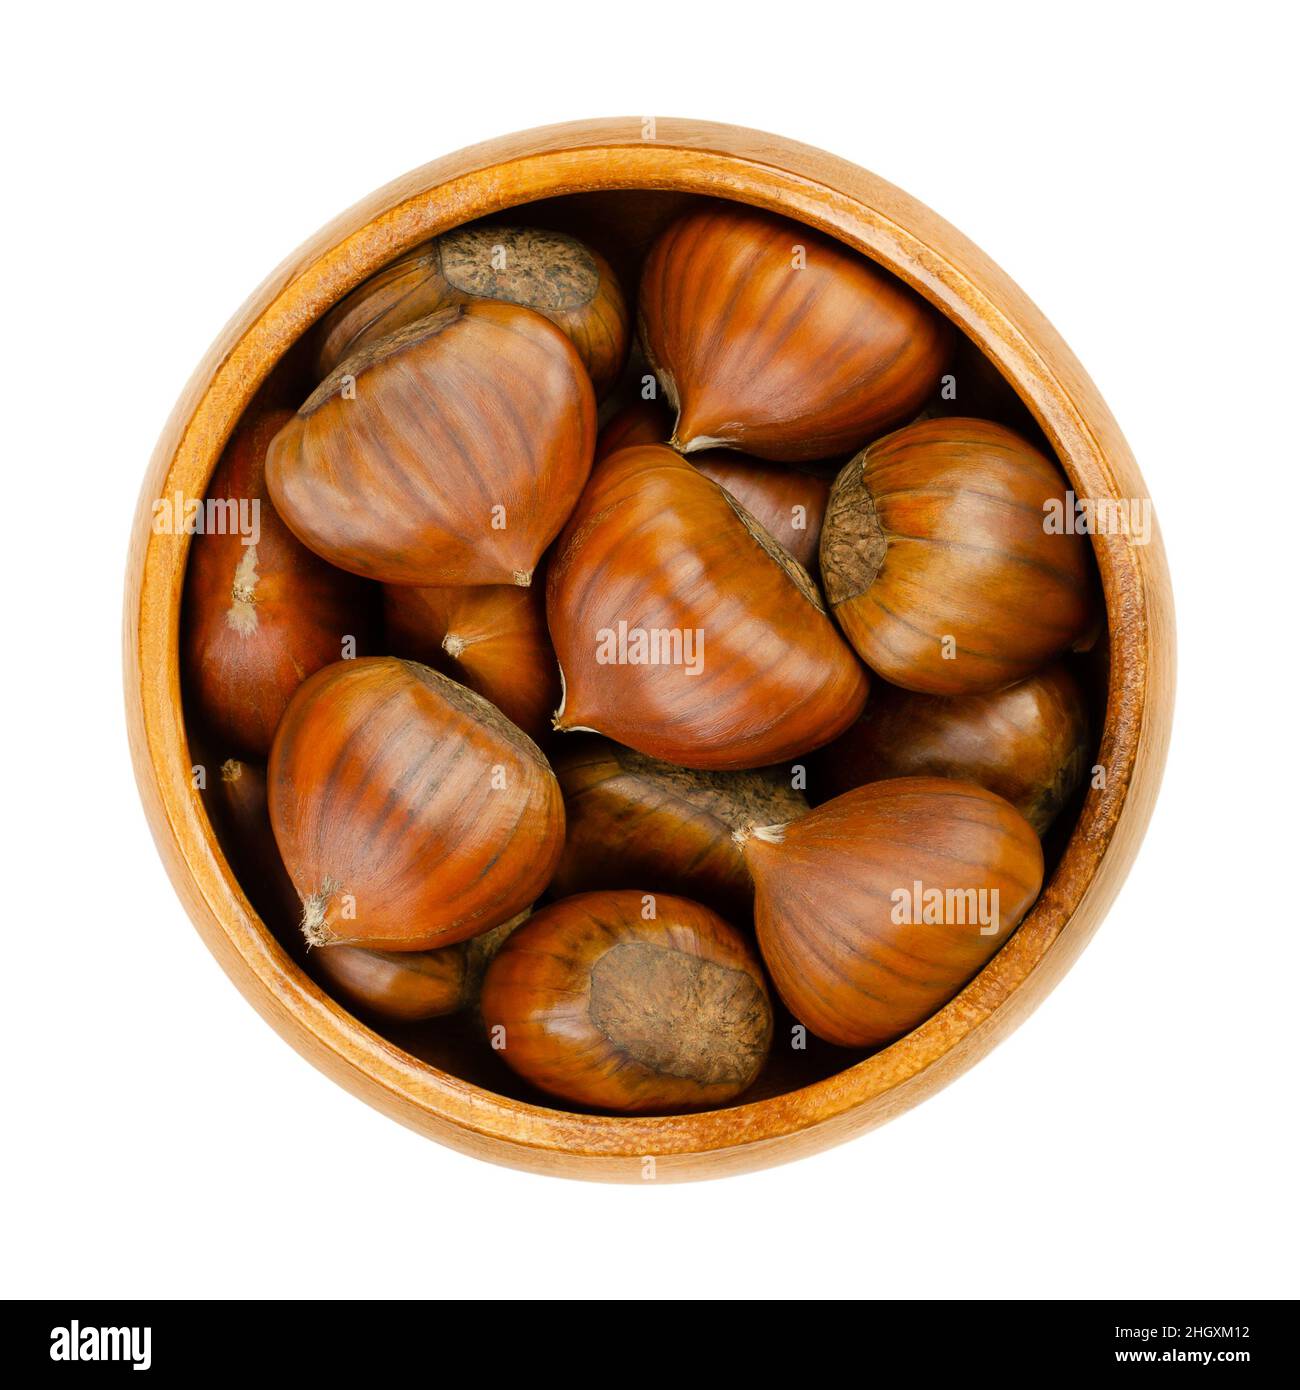 Unshelled chestnuts, in a wooden bowl. Raw nuts of sweet chestnut, Castanea sativa. They can be eaten raw, roasted, candied, cooked or milled. Stock Photo